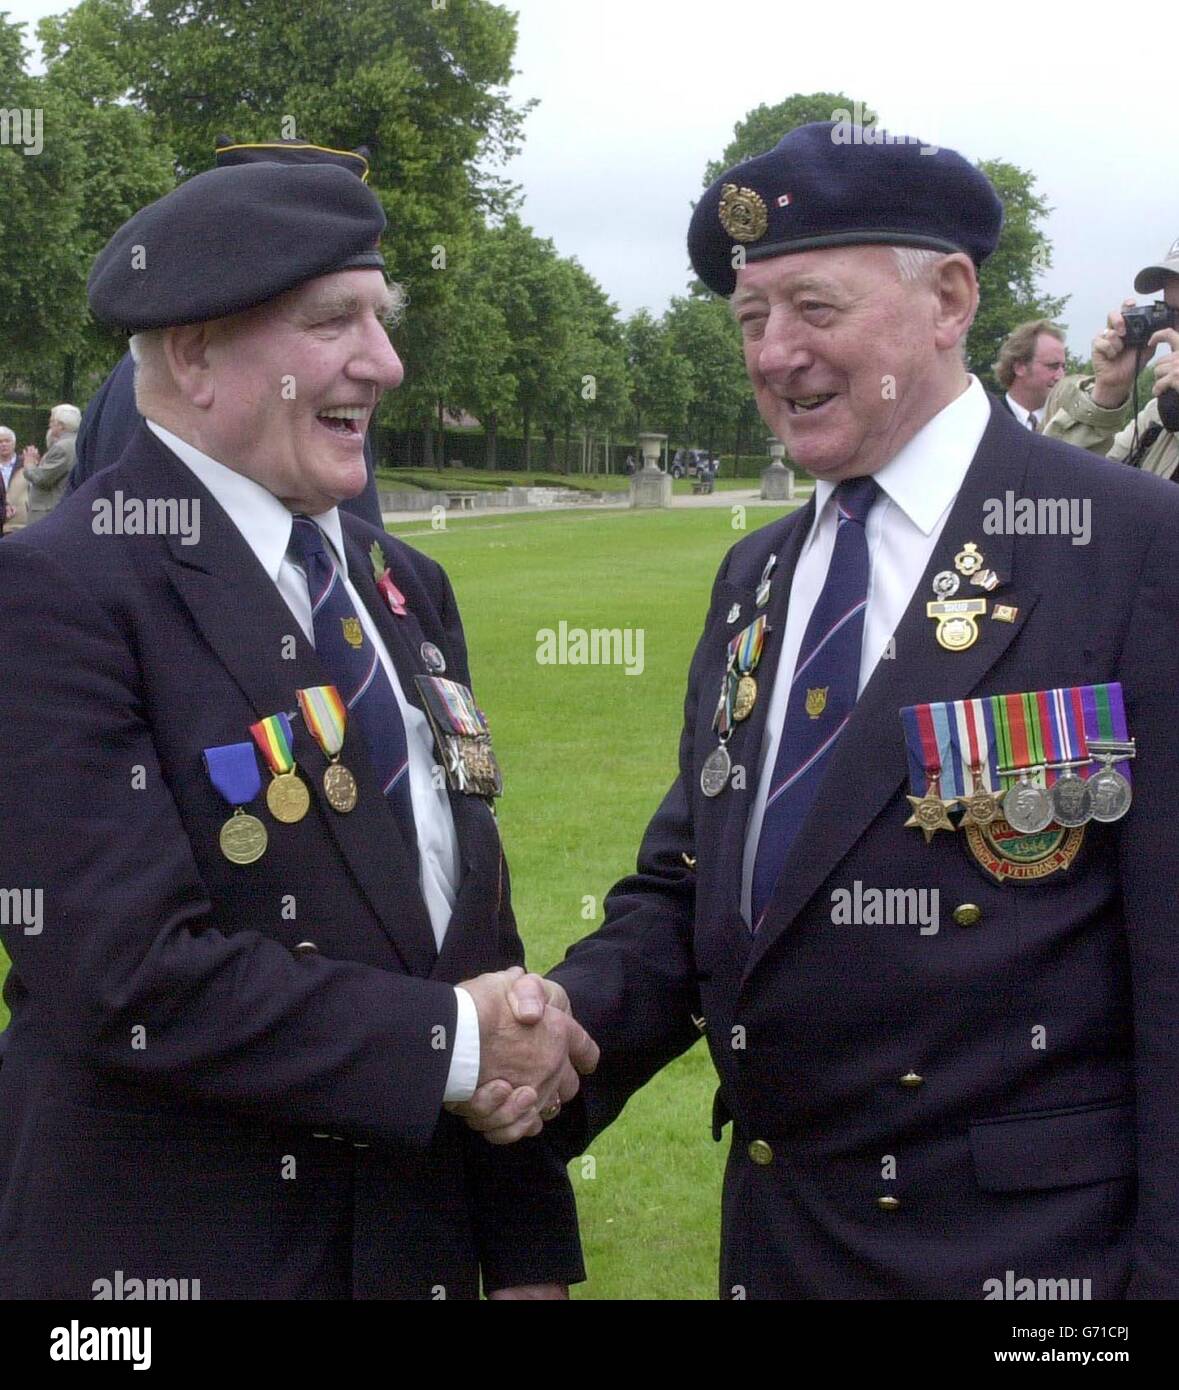 D-Day veterans Royal Engineer Jack Summers, from North Hykeham, Lincs, and, right, Durham Light Infantryman George Richardson, from Calverton, Notts, reminisce at a ceremony in Caen, to award Normandy 60th anniversary badges to veterans of the campaign. Stock Photo